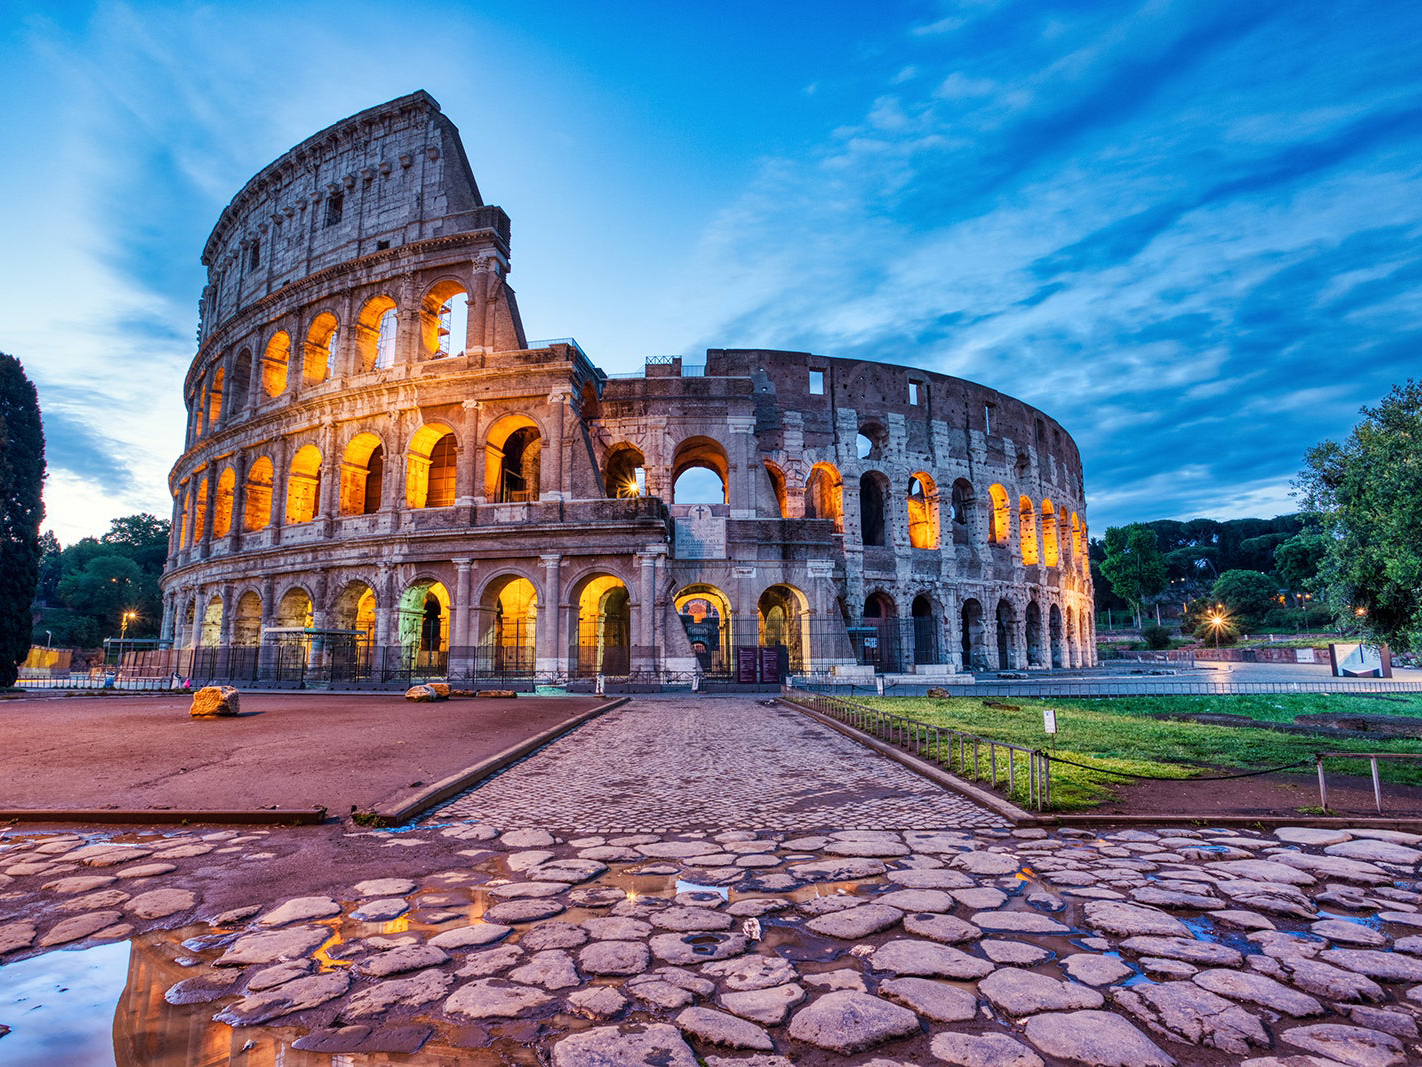 Best Destination for first Europe Trip - Rome, Italy